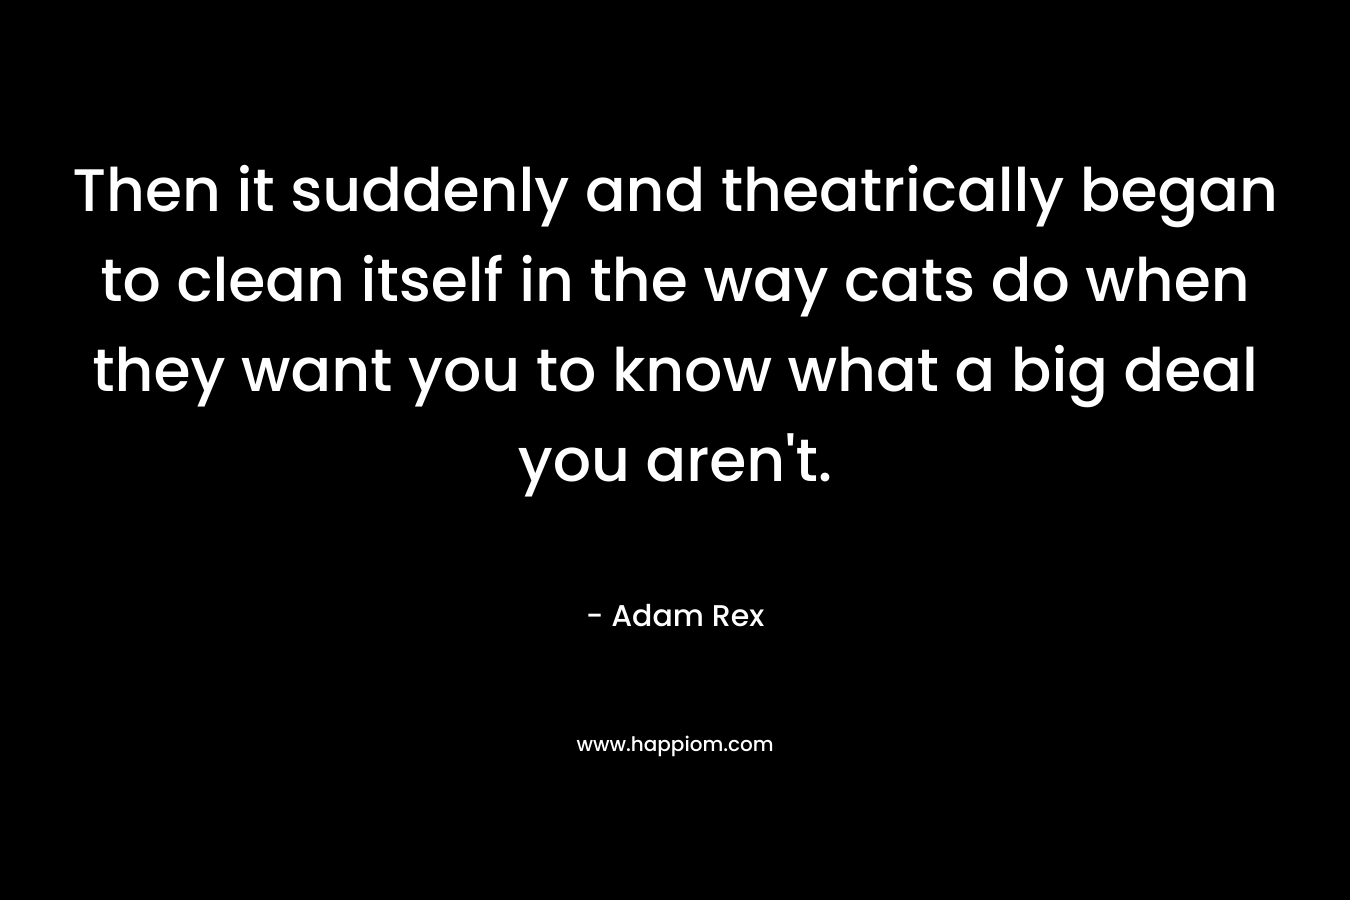 Then it suddenly and theatrically began to clean itself in the way cats do when they want you to know what a big deal you aren't.